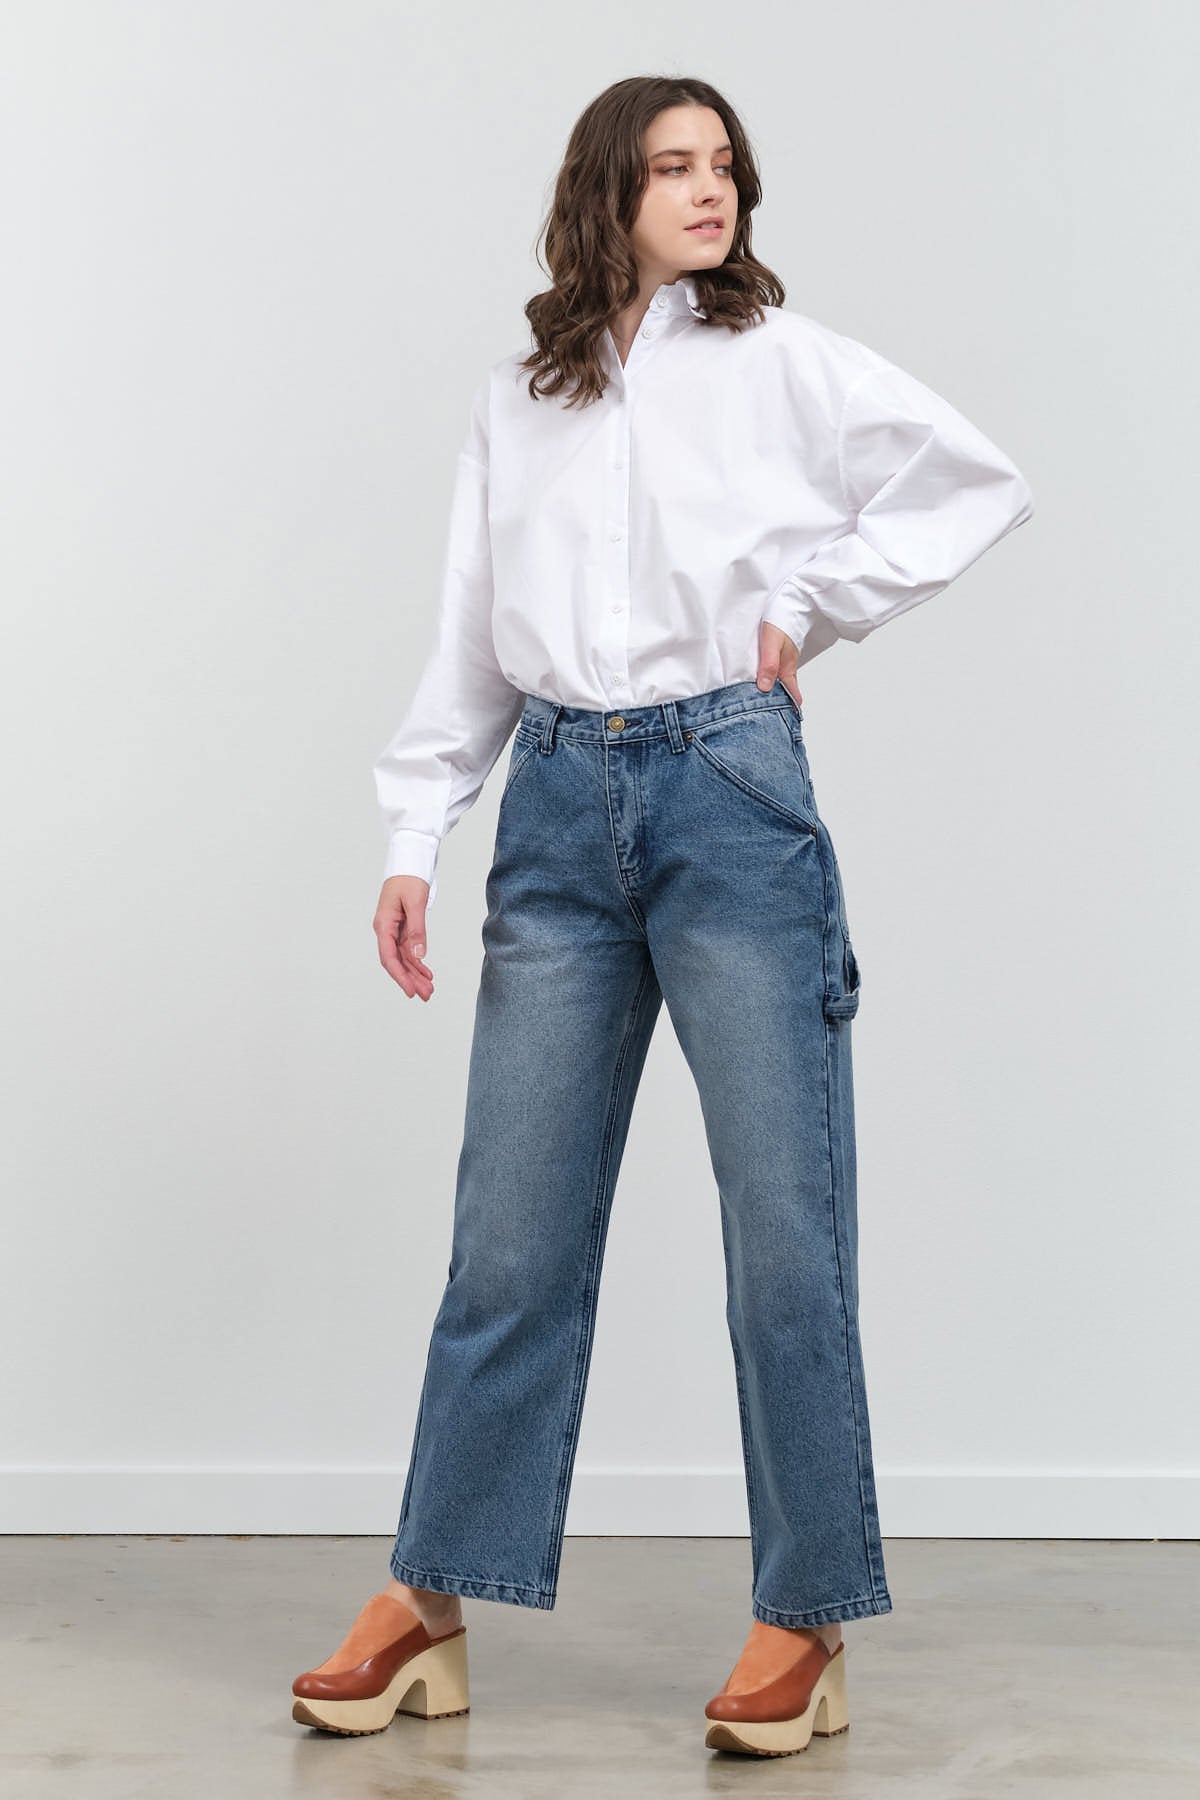 Pull-On Jeans in Keefe Wash